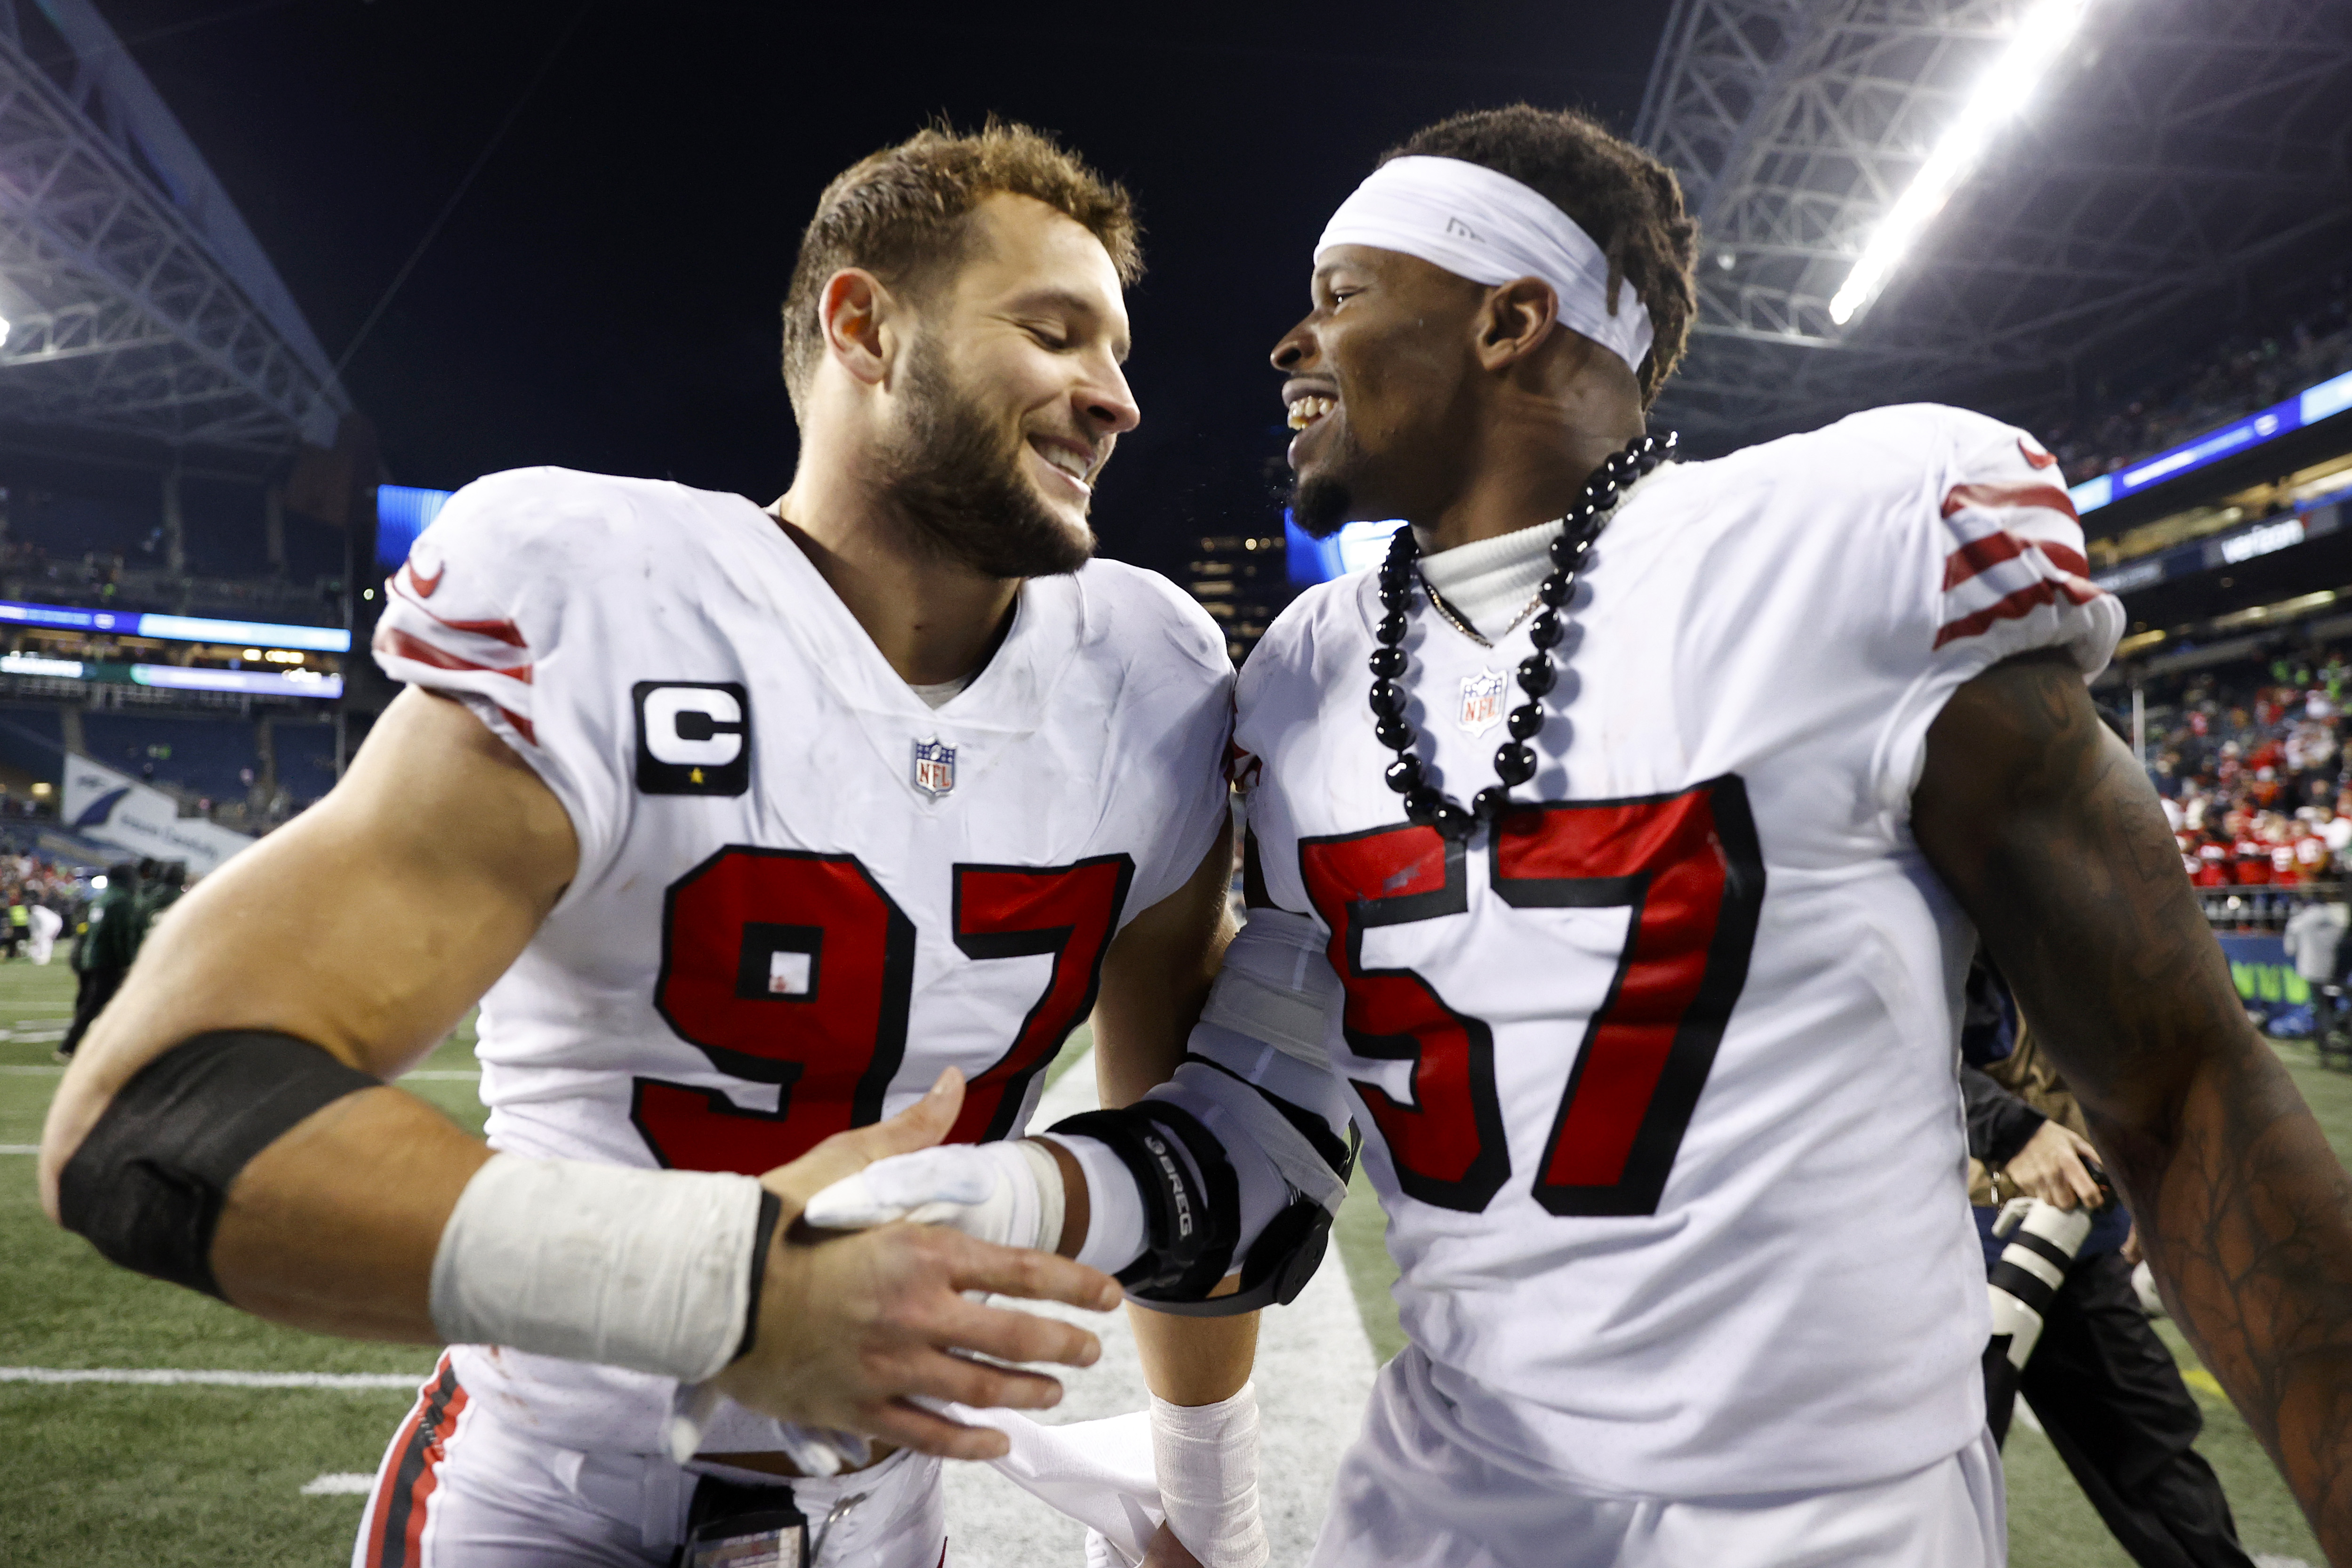 Nick Bosa #97 and Dre Greenlaw #57 of the San Francisco 49ers celebrate after defeating the Seattle Seahawks at Lumen Field on December 15, 2022 in Seattle, Washington.